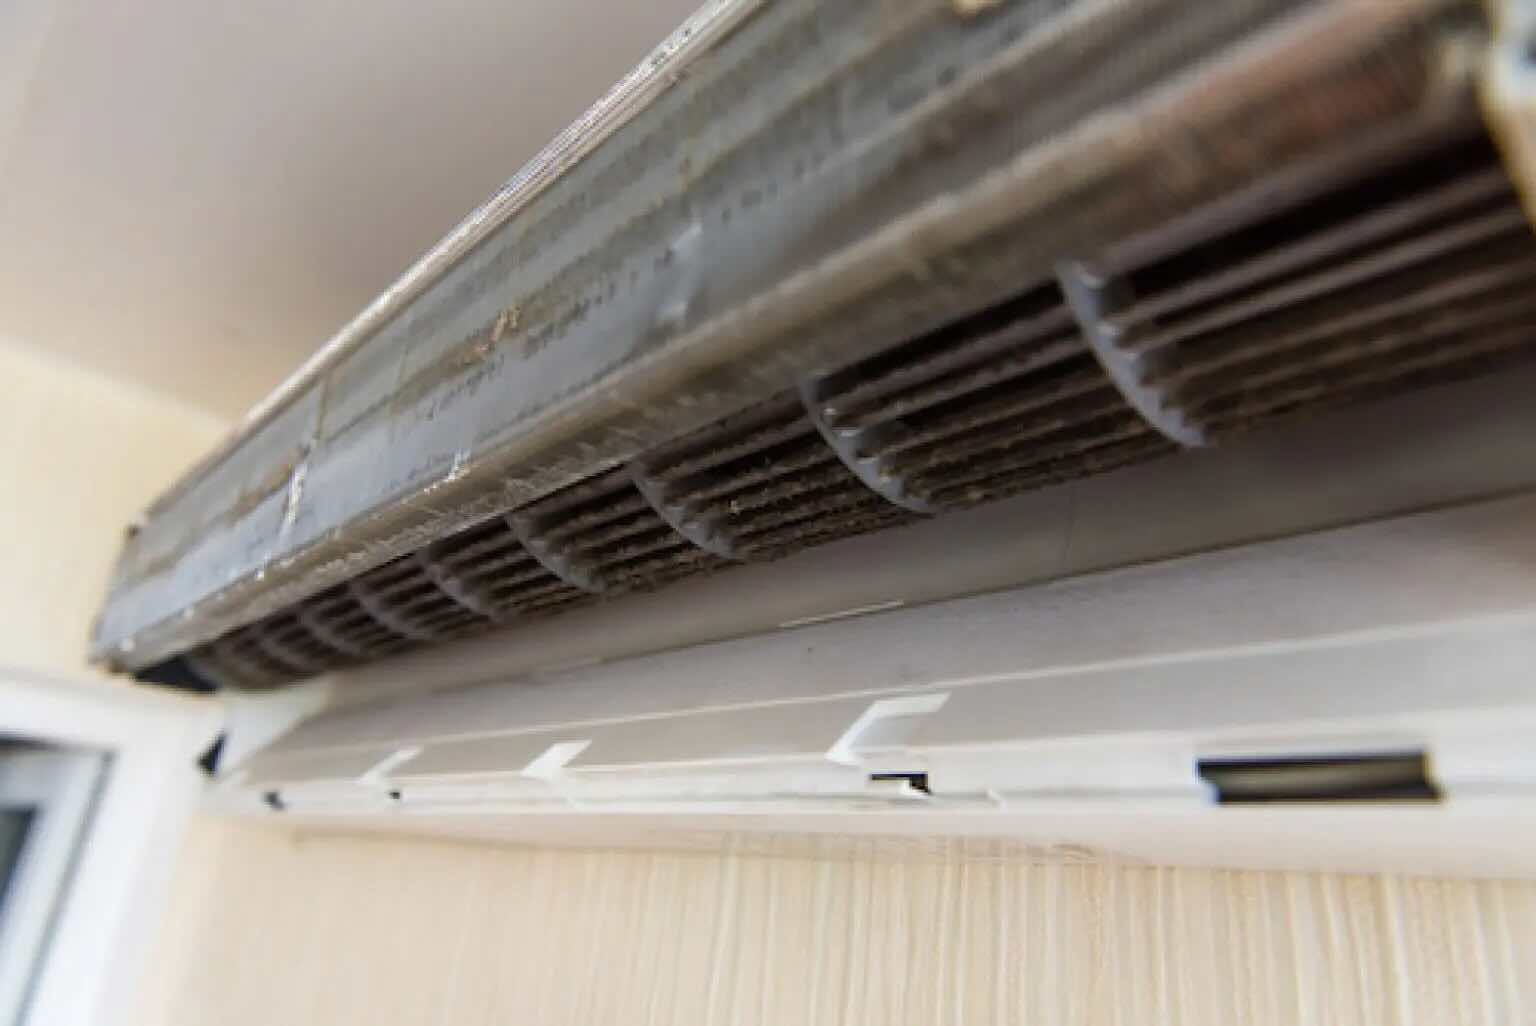 How To Clean Mold On Styrofoam In An Air Conditioner